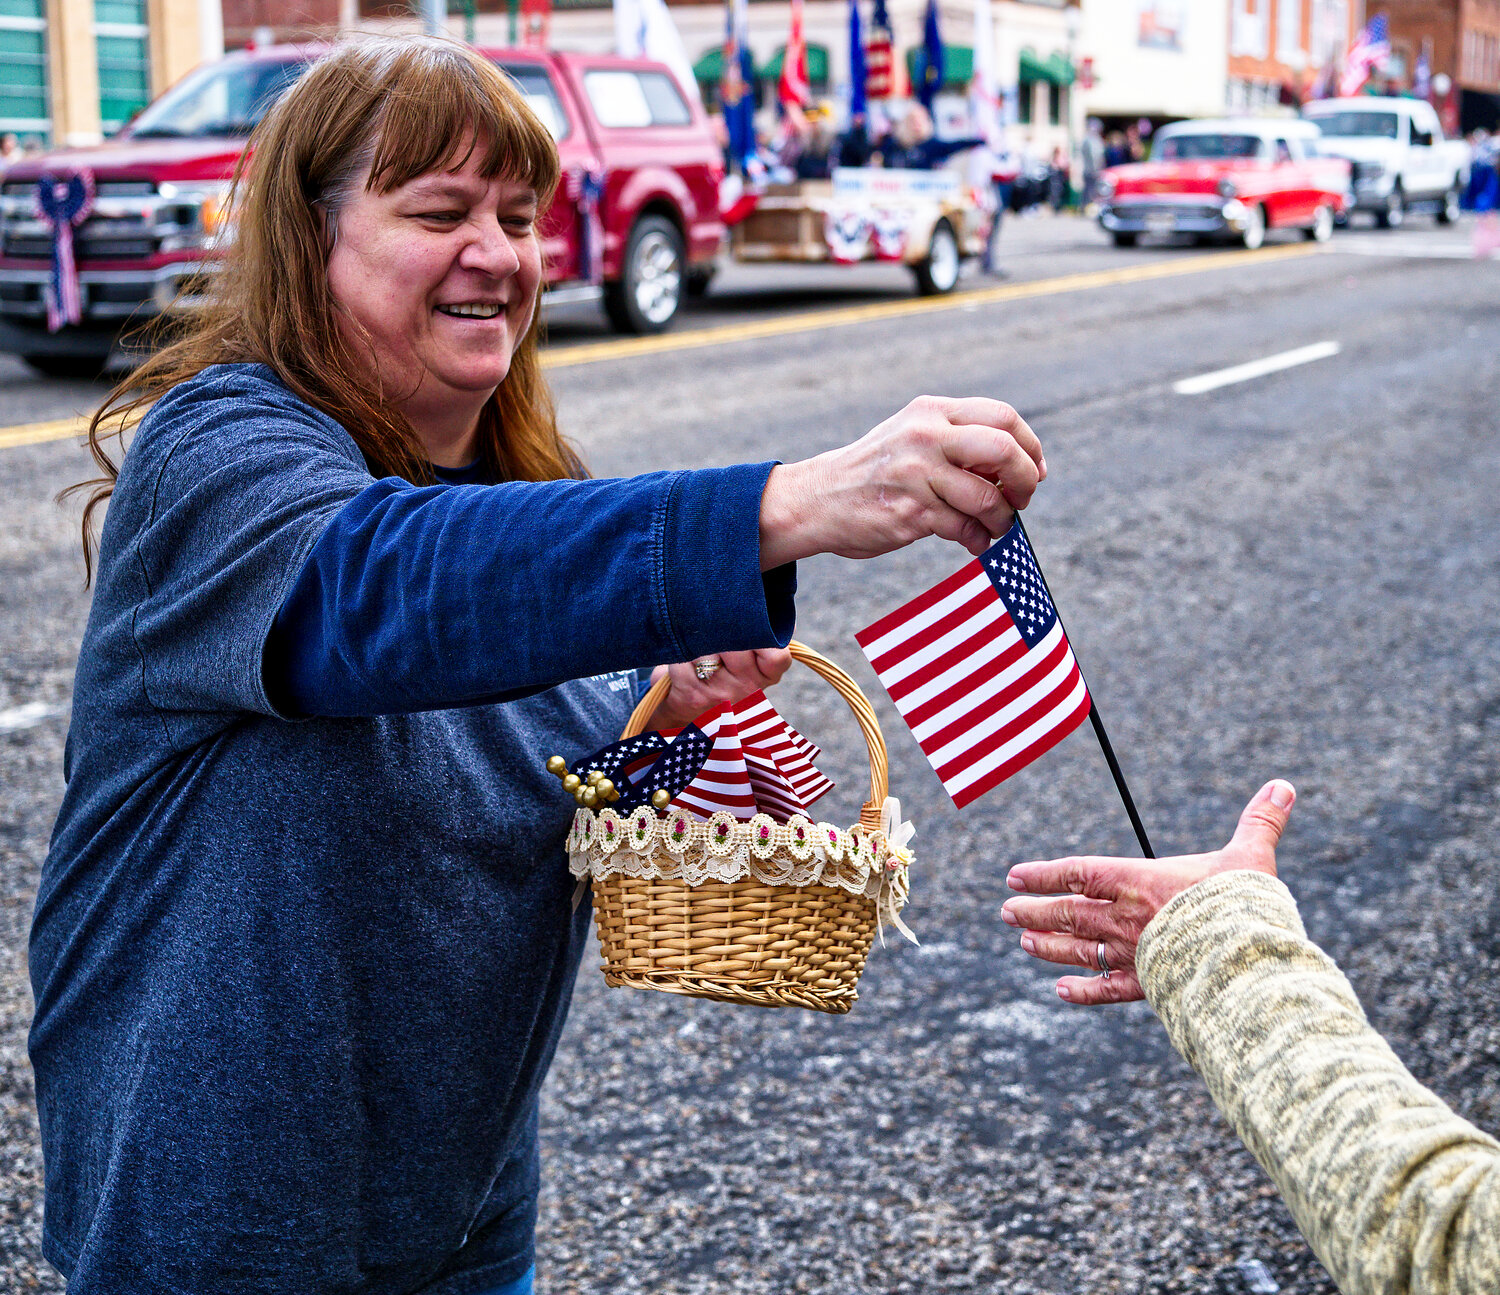 Attendees at the Veterans Day parade could receive a free flag to wave. [various Veterans Day views]